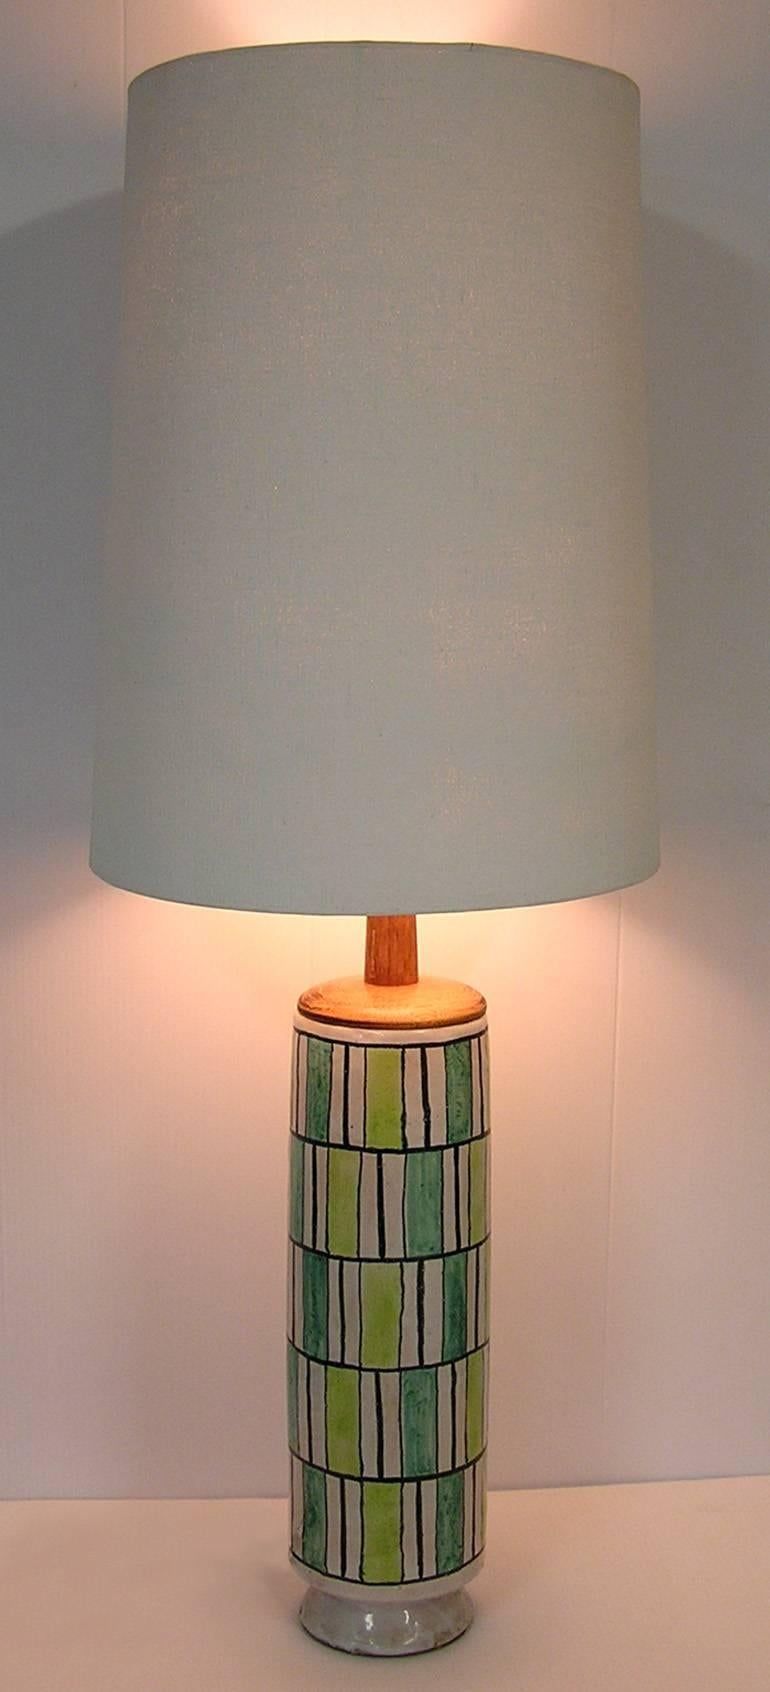 Large Pair of Italian Ceramic Table Lamps by Raymor, circa 1950s For Sale 2